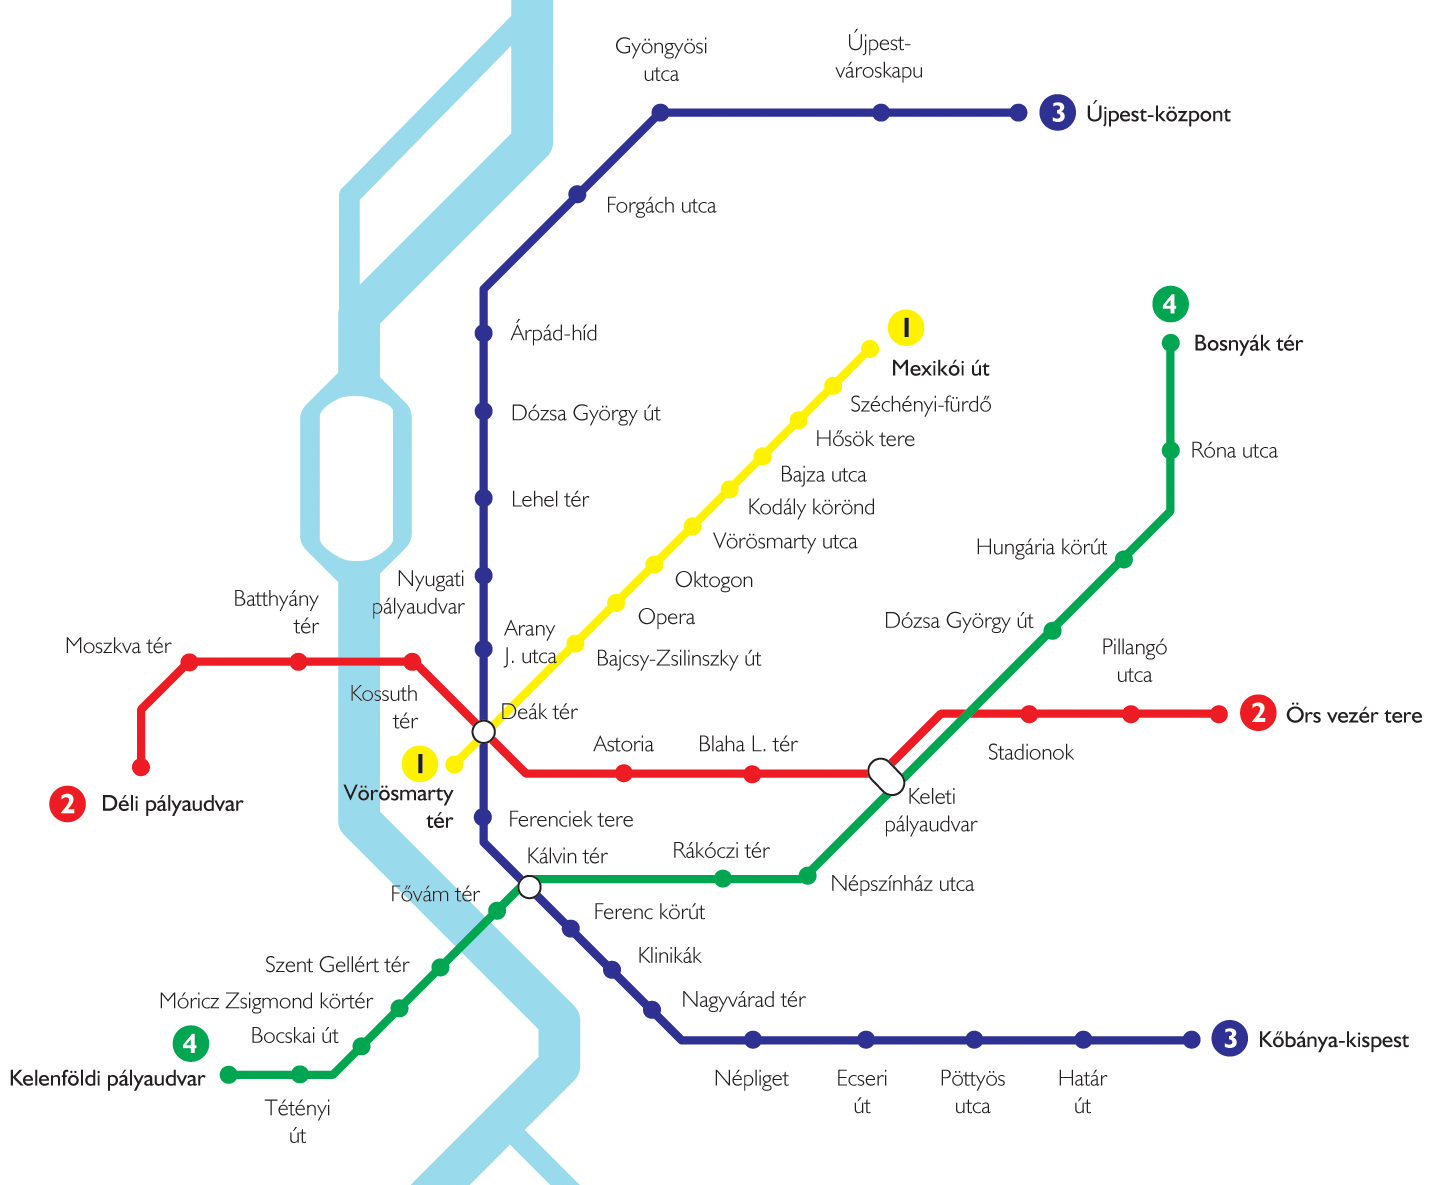 The metro line network of Budapest